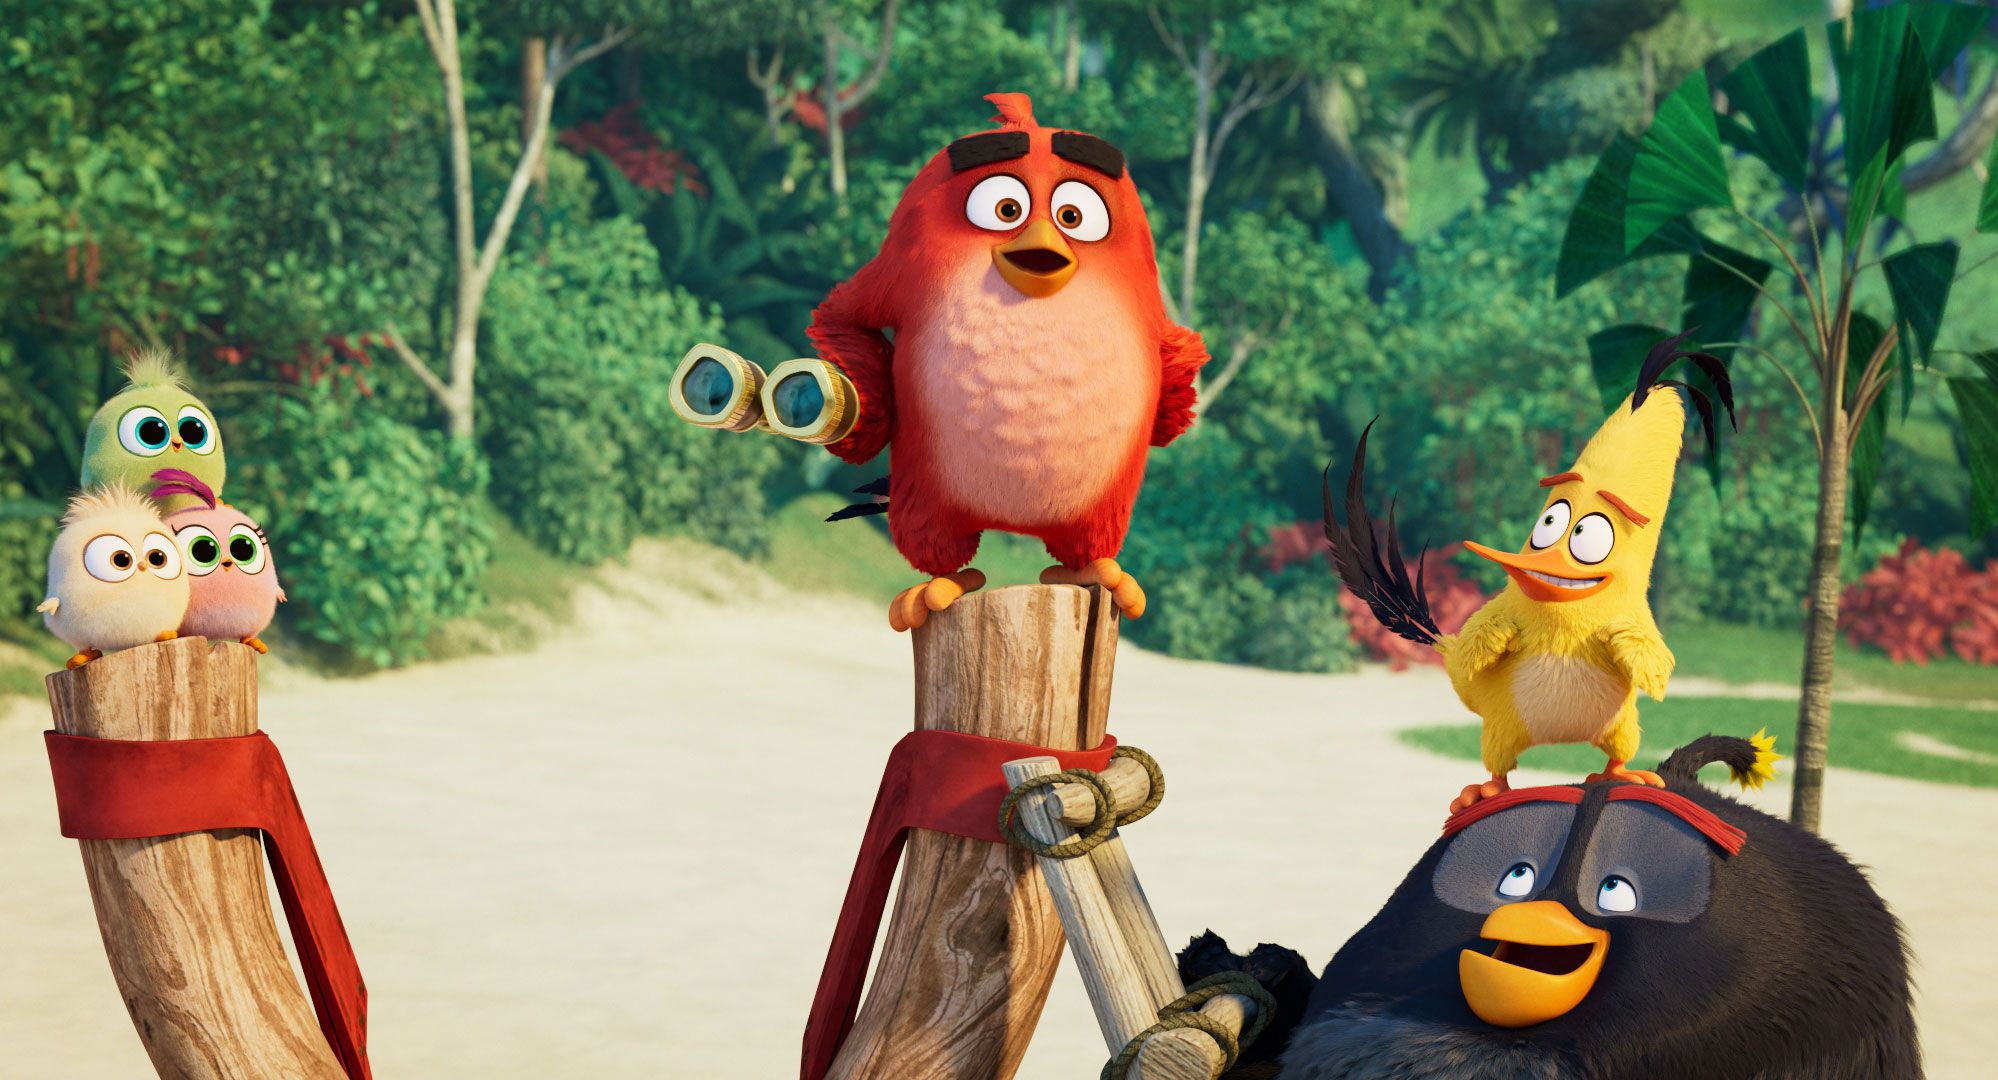 watch angry birds 2 online